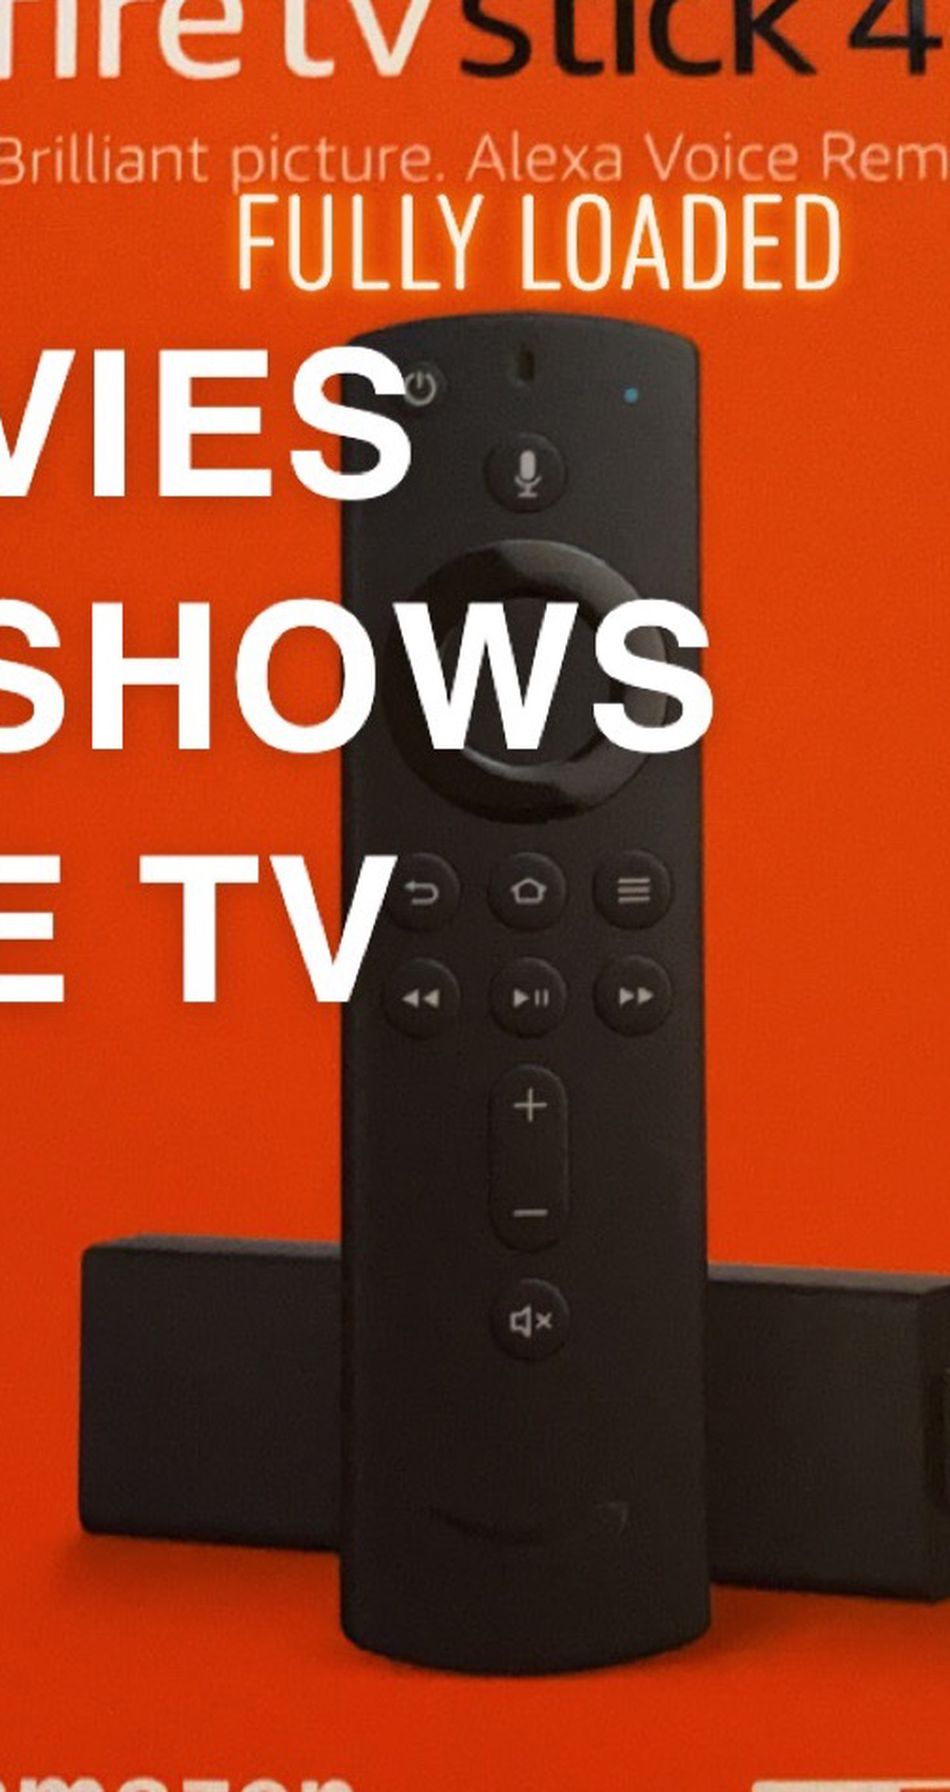 🔥 Fully Loaded🔥 Fire TV 4K Stick With Alexa Voice Remote 2020